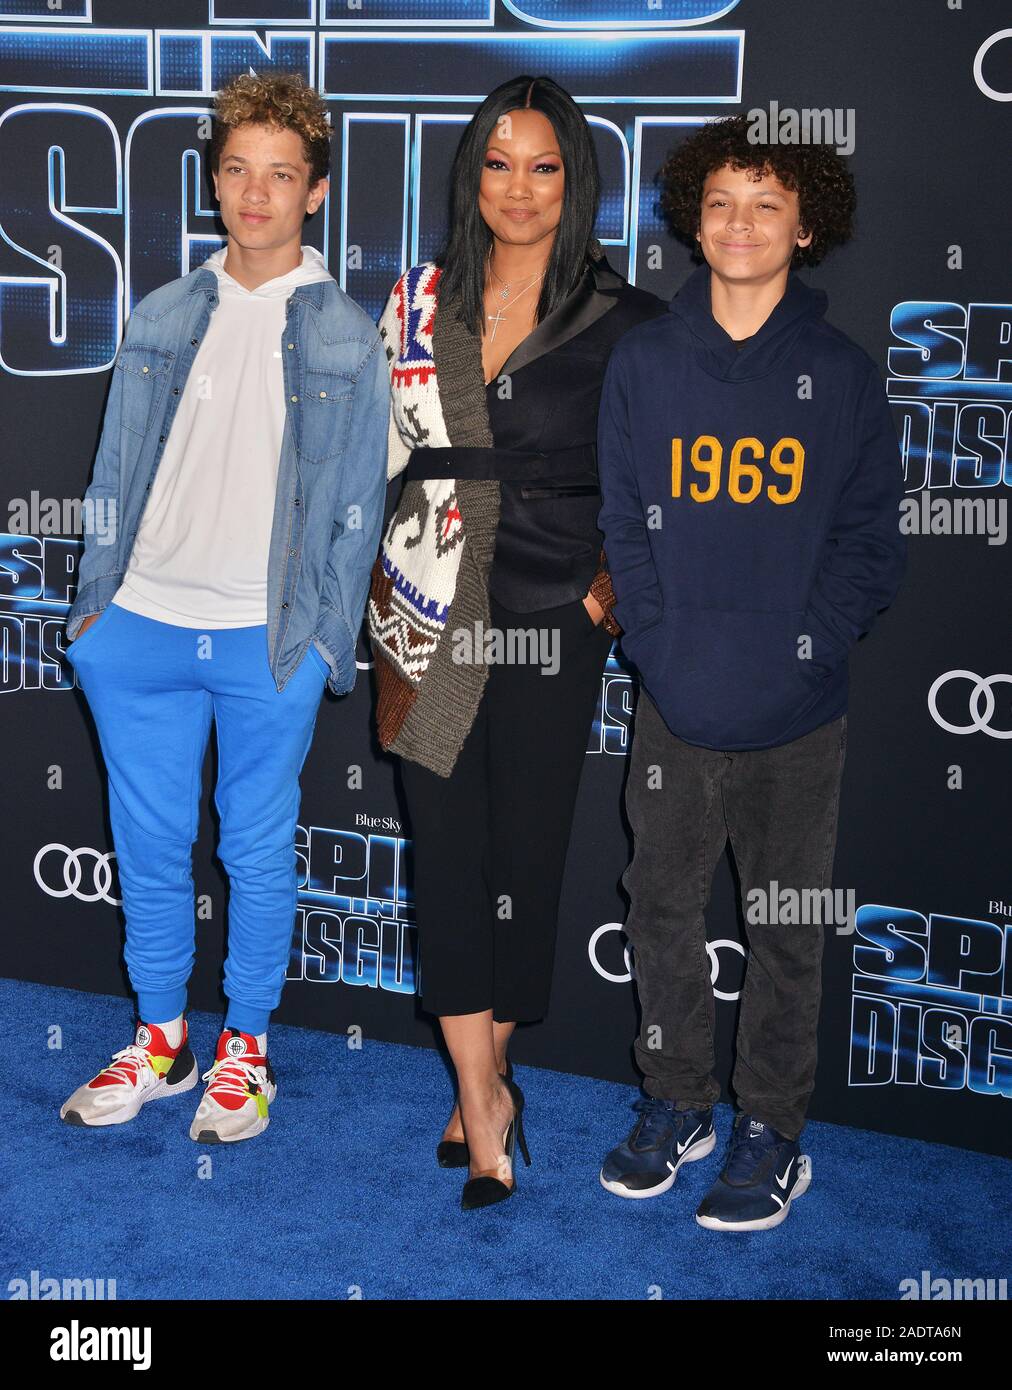 Los Angeles, USA. 4th Dec, 2019. Jaid Thomas Nilon, actress Garcelle Beauvais and Jax Joseph Nilon attends the premiere of 20th Century Fox's 'Spies In Disguise' at El Capitan Theatre on December 04, 2019 in Los Angeles, Credit: Tsuni/USA/Alamy Live News Stock Photo